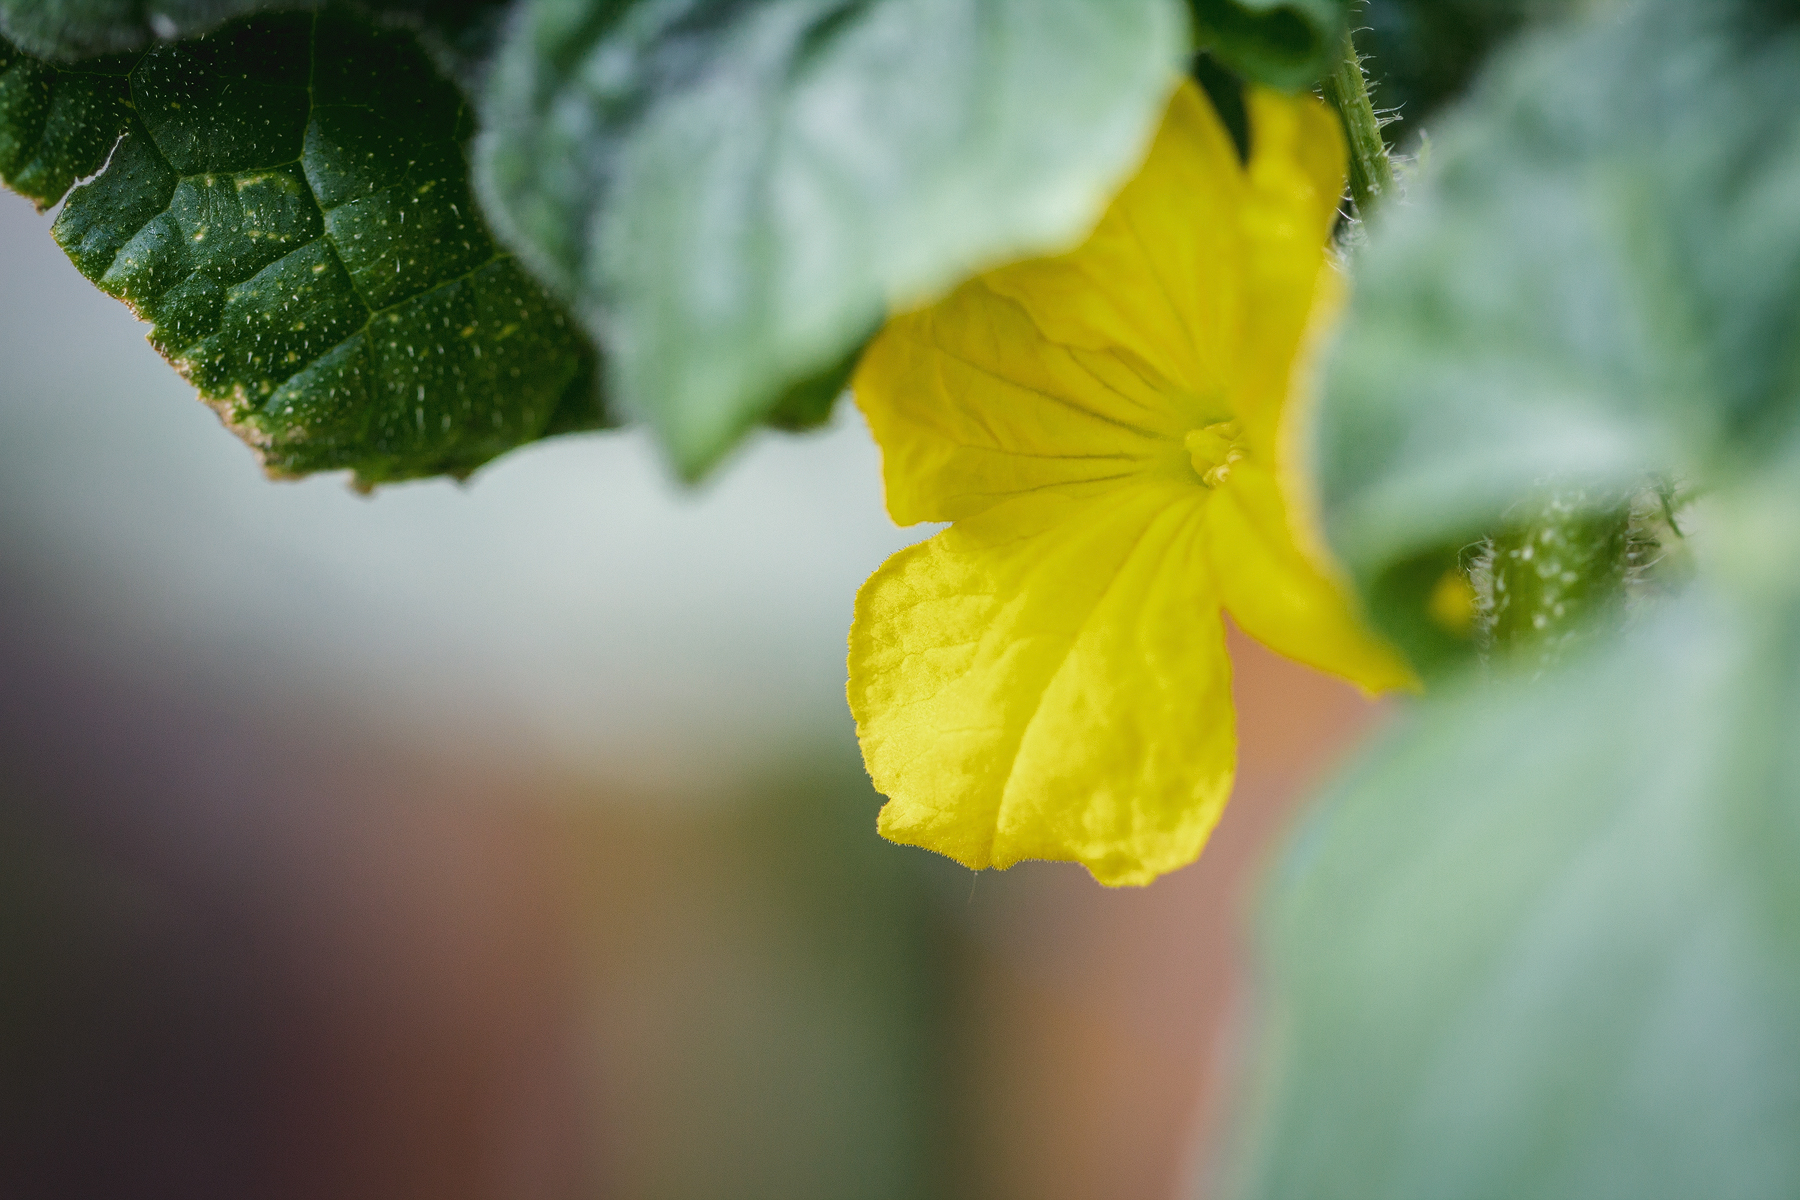 Cucumber flower and plant